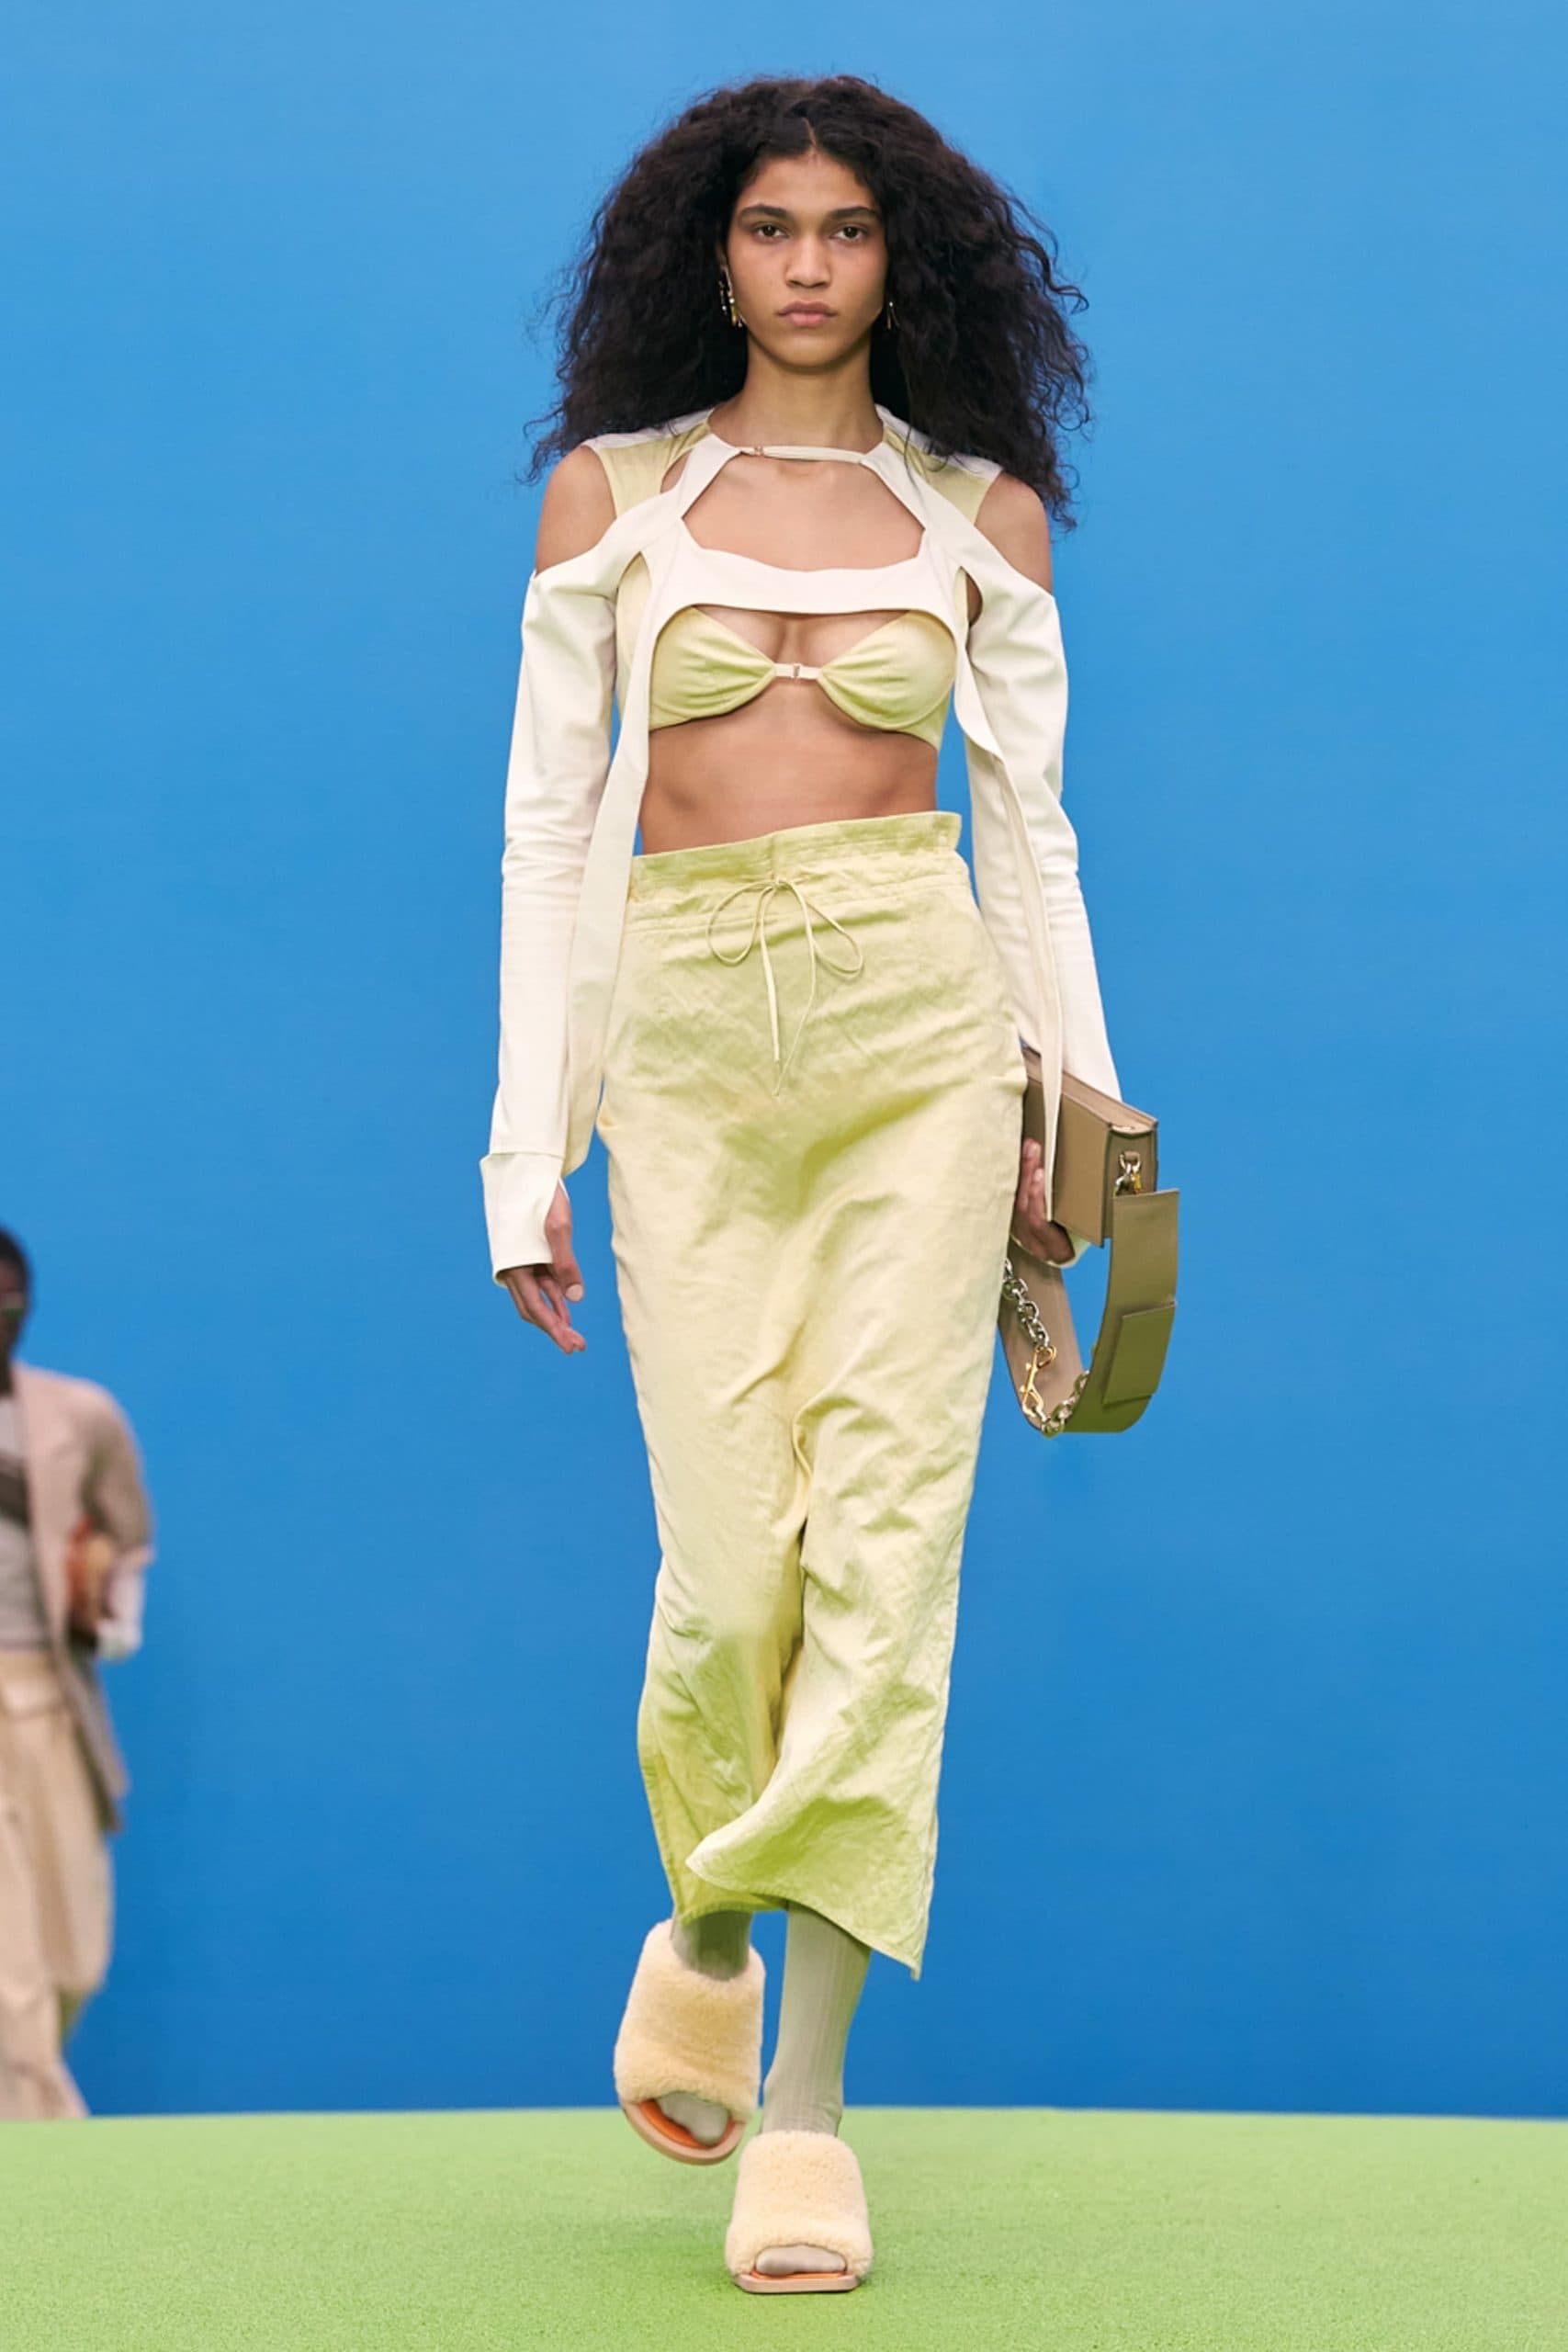 Jacquemus Fall/Winter 2020 Runway Show Is Going Viral